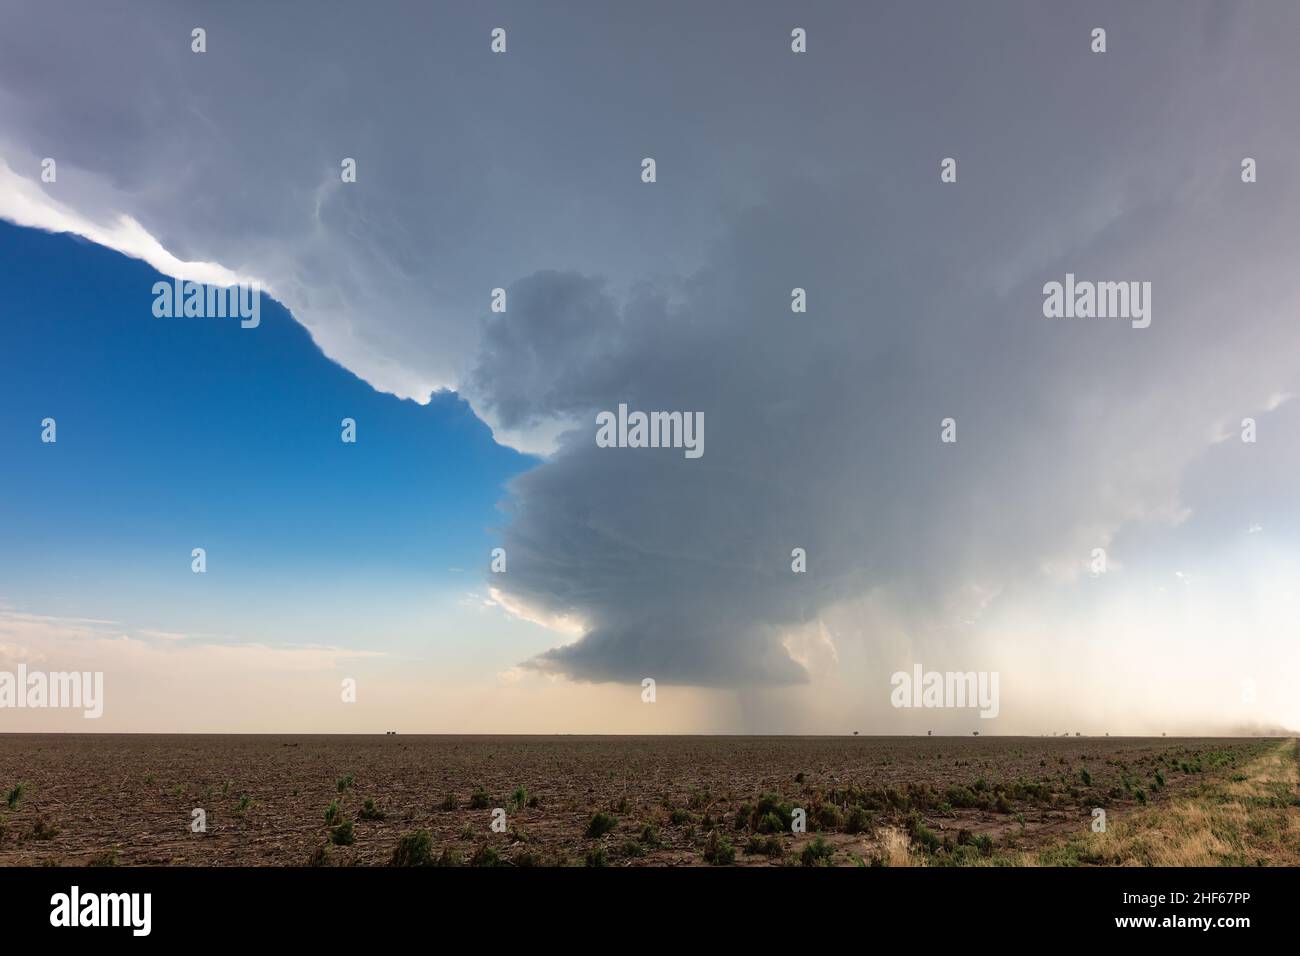 Supercell thunderstorm cumulonimbus cloud drifts across a field in the plains near Holly, Colorado, USA Stock Photo